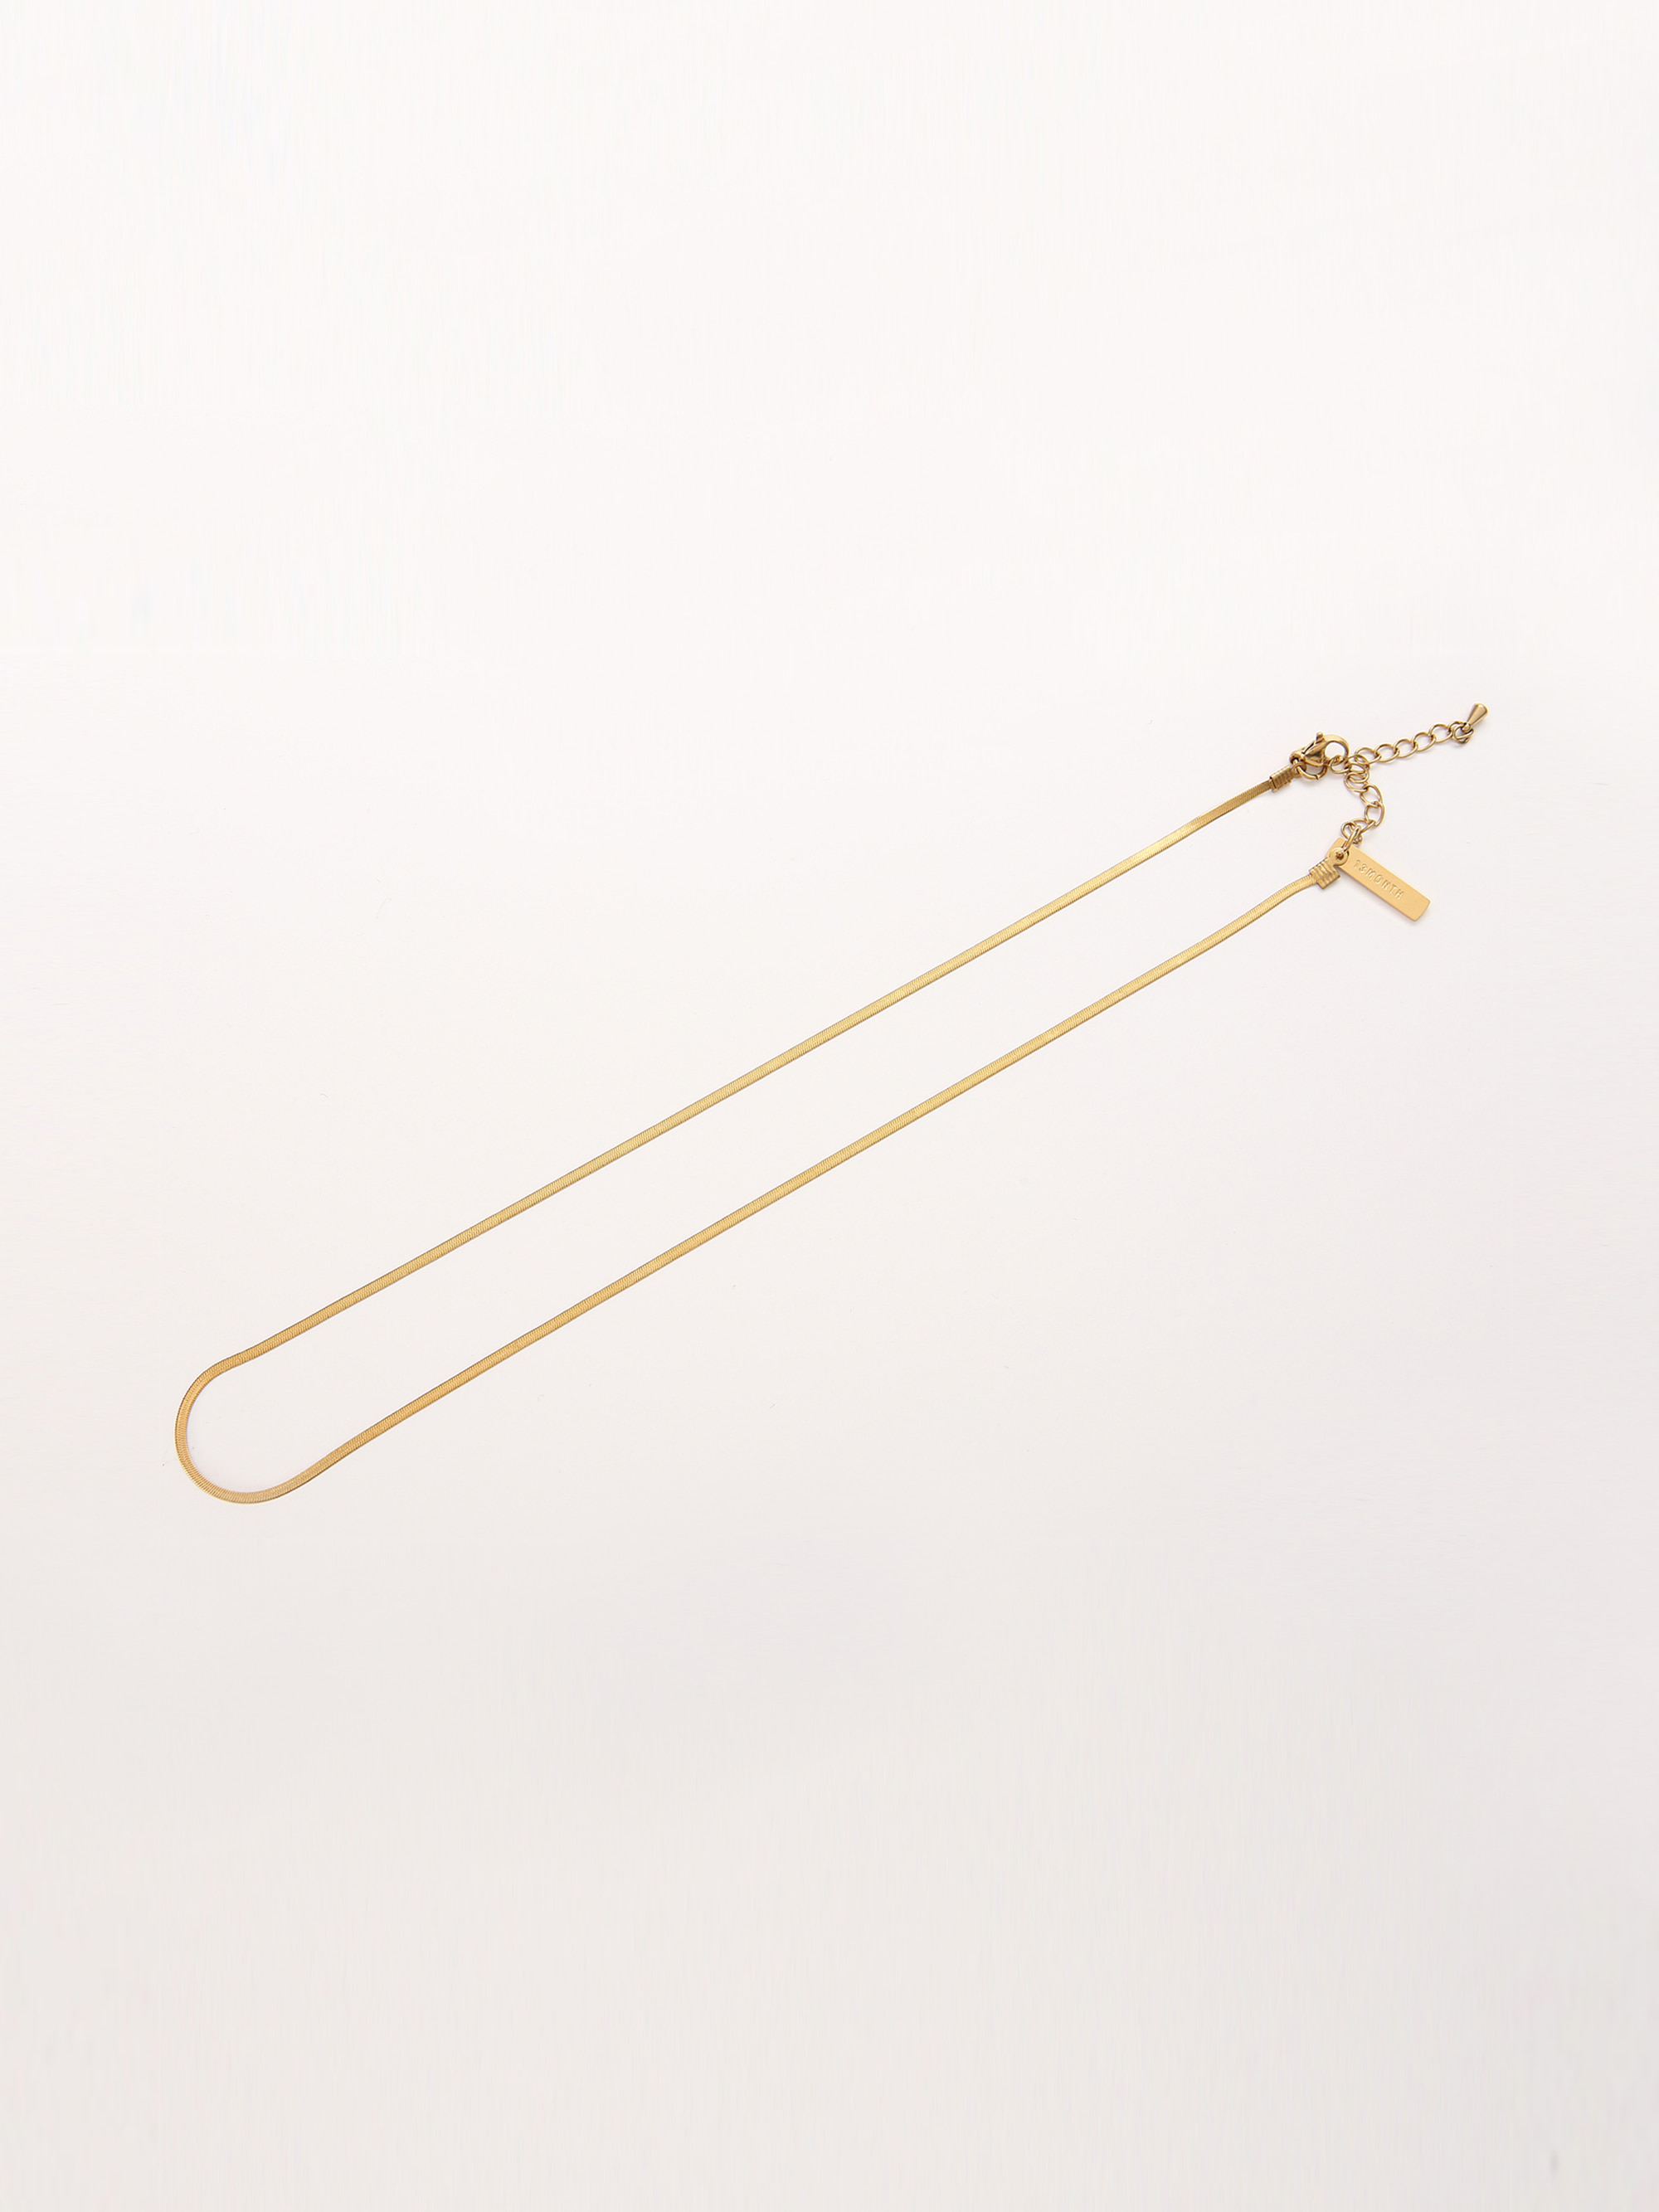 THIN FLAT SNAKE CHAIN NECKLACE (GOLD)